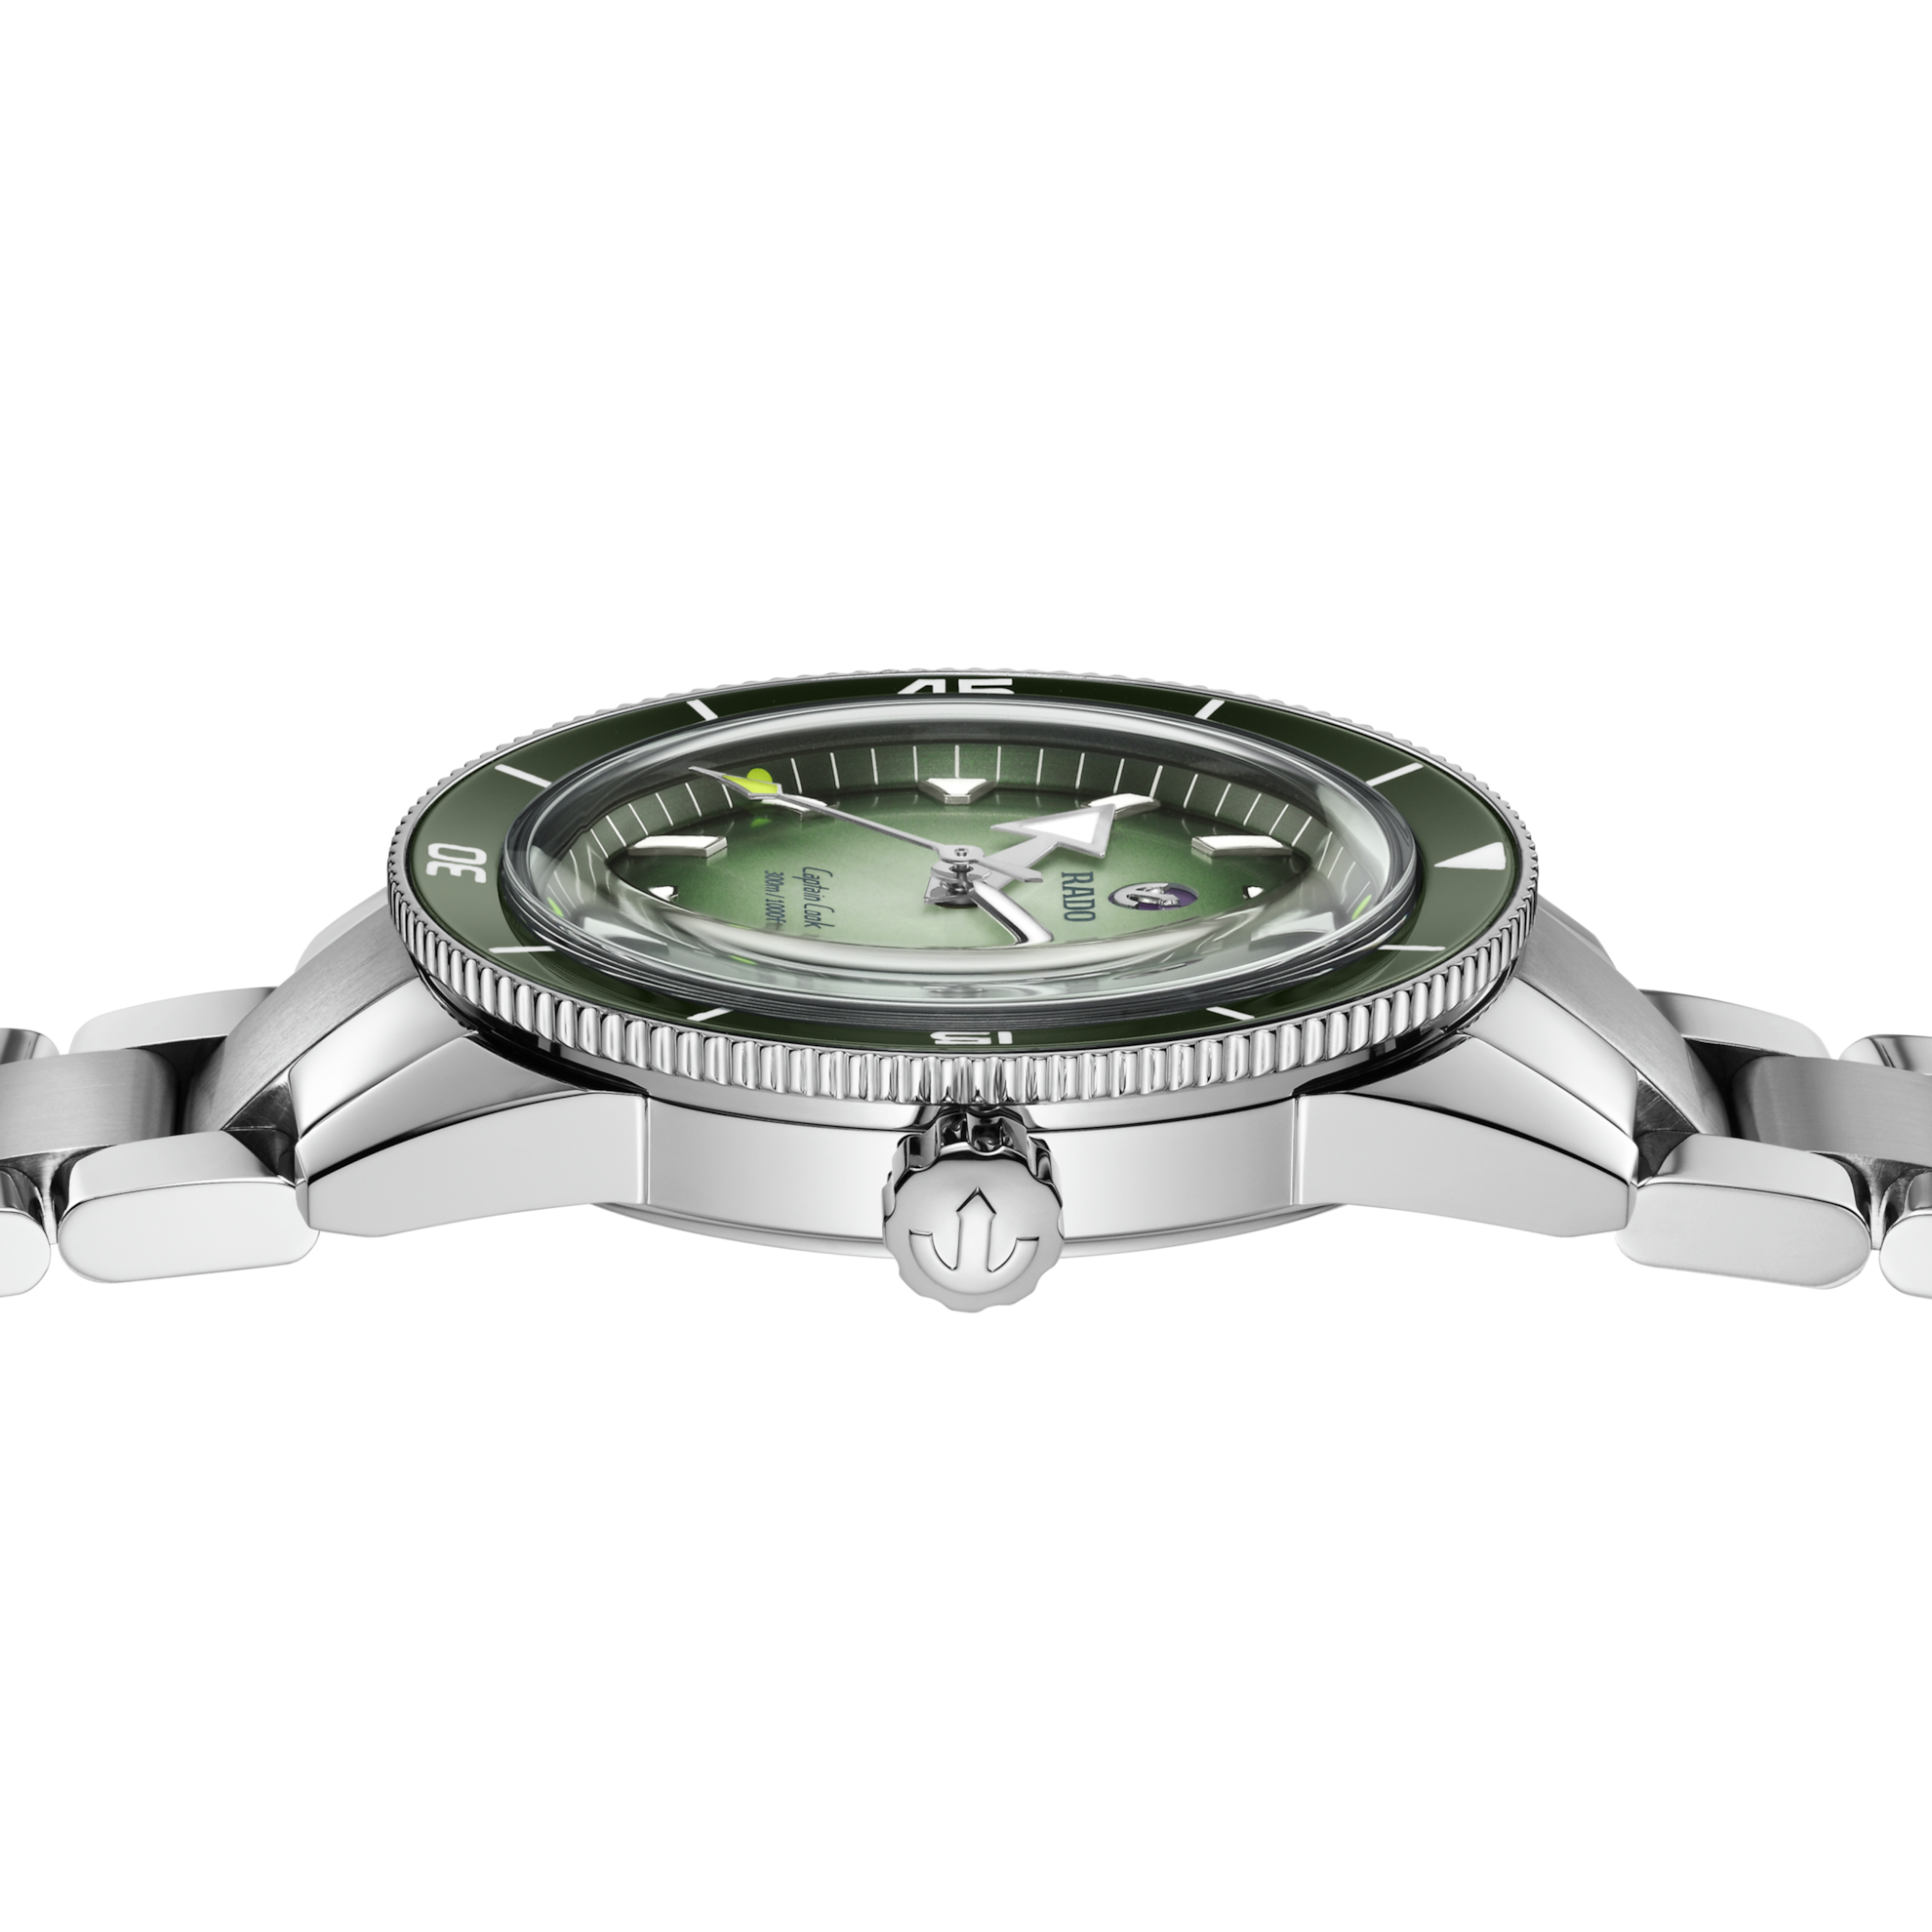 RADO CAPTAIN COOK AUTOMATIC 42 MM STAINLESS STEEL GREEN